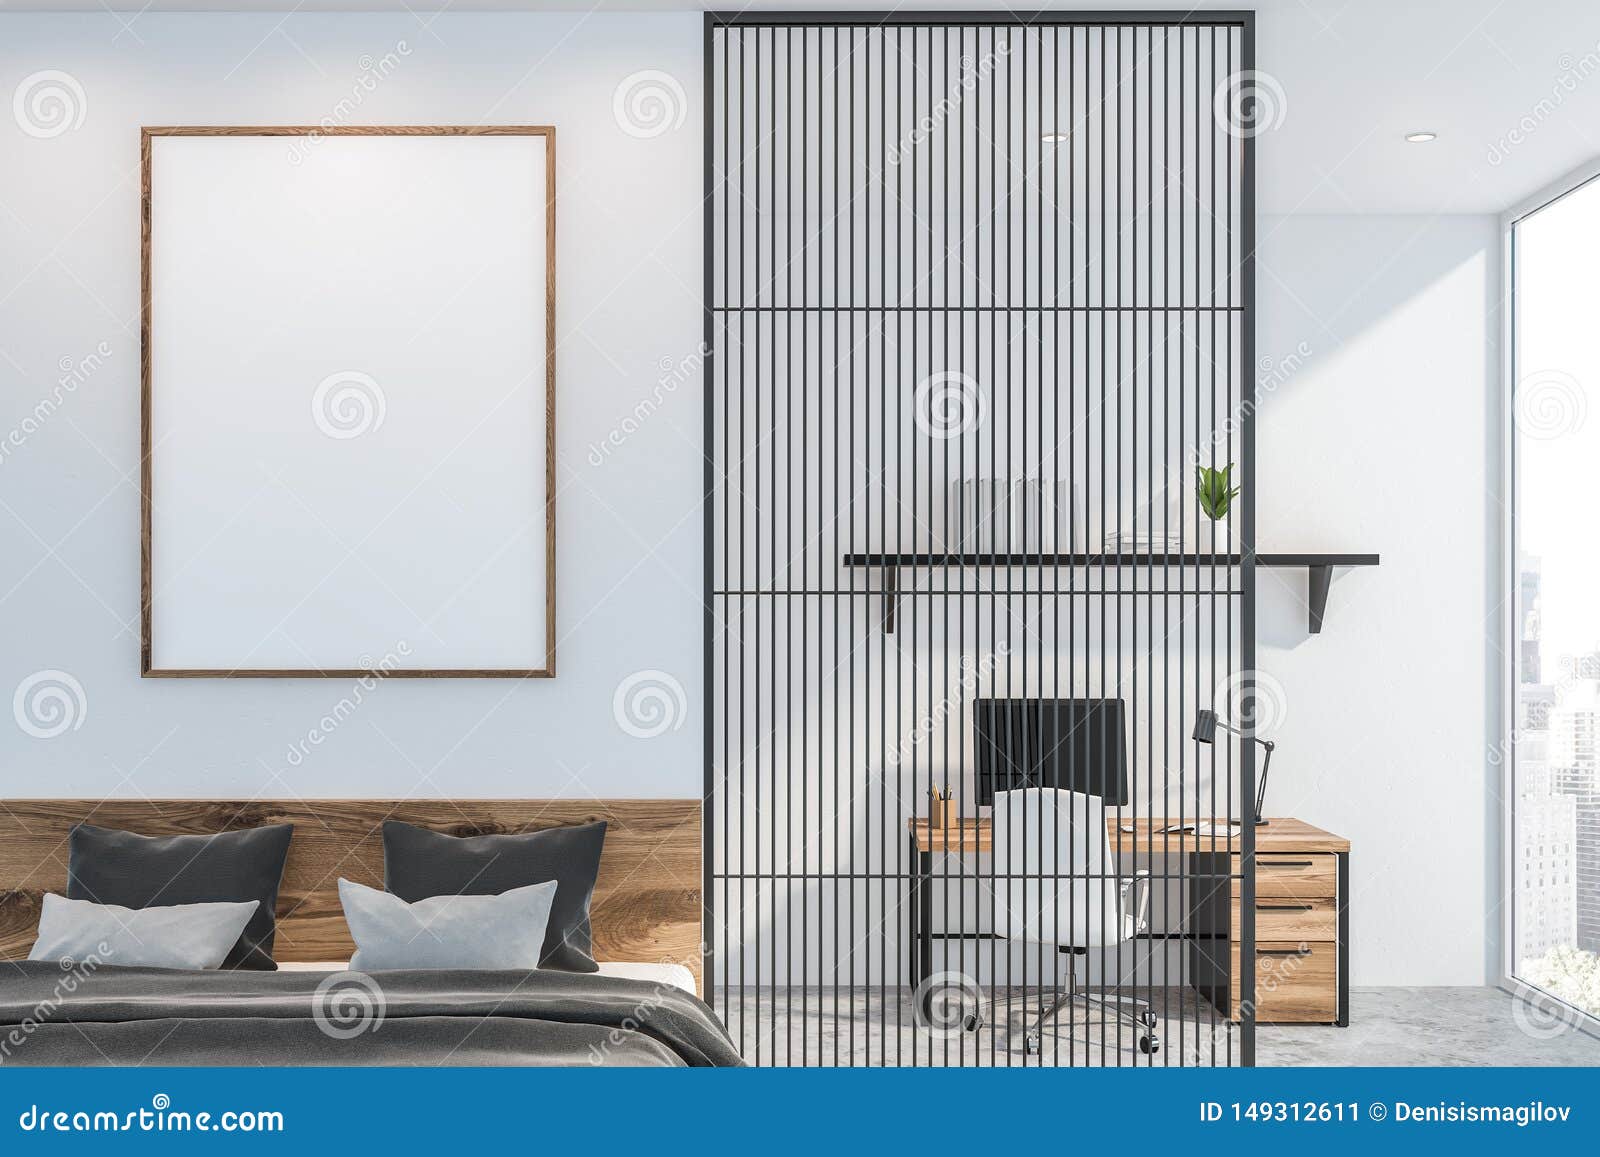 White Bedroom And Home Office Interior With Poster Stock